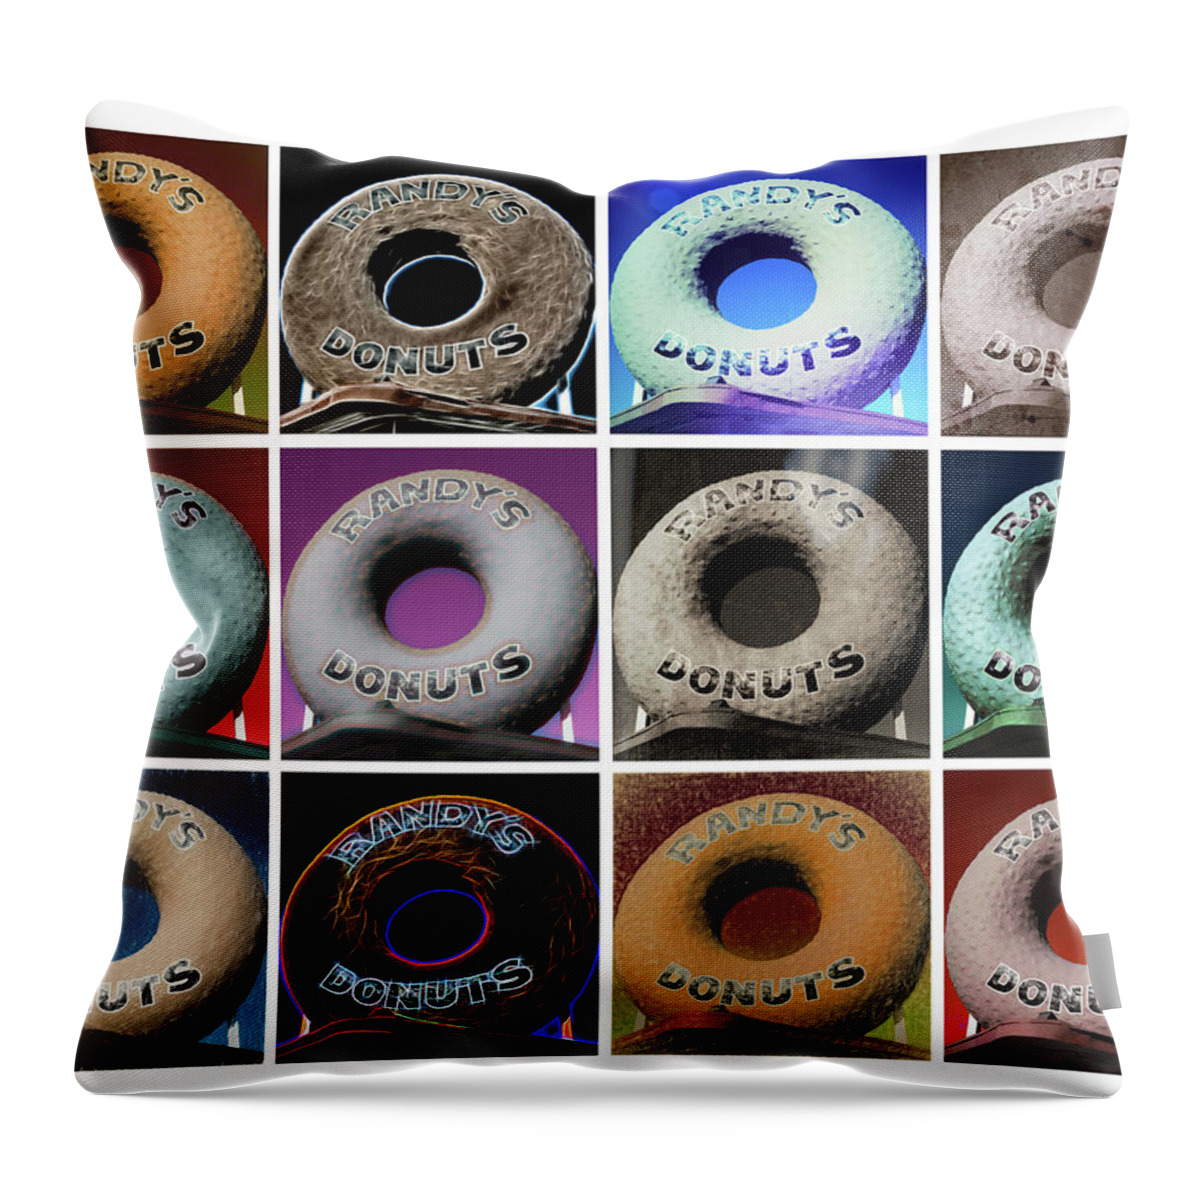 Randy's Donuts Throw Pillow featuring the photograph Randy's Donuts - Dozen Assorted by Stephen Stookey